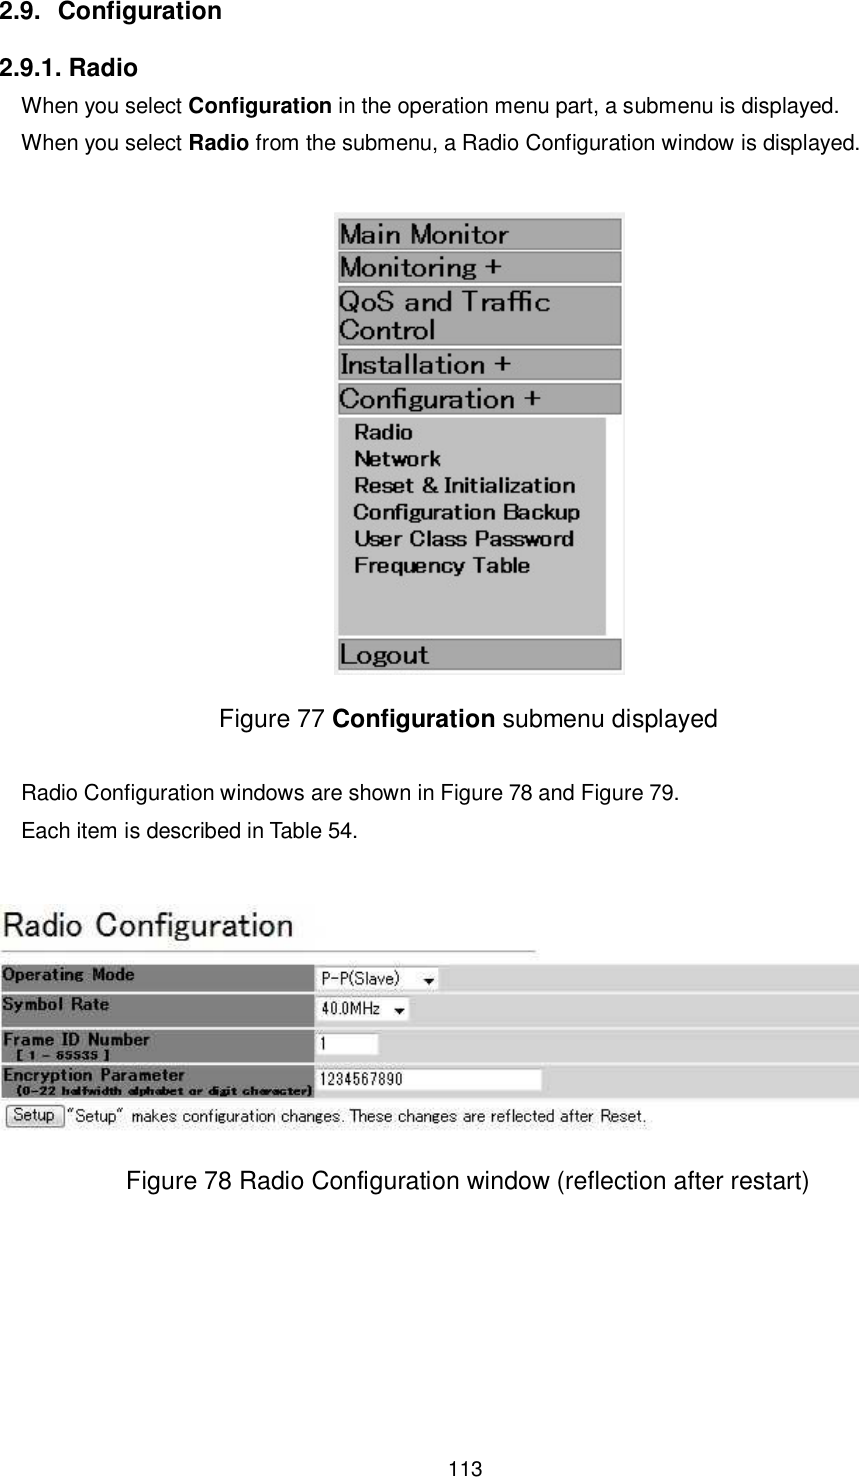    113  2.9.  Configuration 2.9.1. Radio When you select Configuration in the operation menu part, a submenu is displayed. When you select Radio from the submenu, a Radio Configuration window is displayed.   Figure 77 Configuration submenu displayed  Radio Configuration windows are shown in Figure 78 and Figure 79. Each item is described in Table 54.   Figure 78 Radio Configuration window (reflection after restart)  